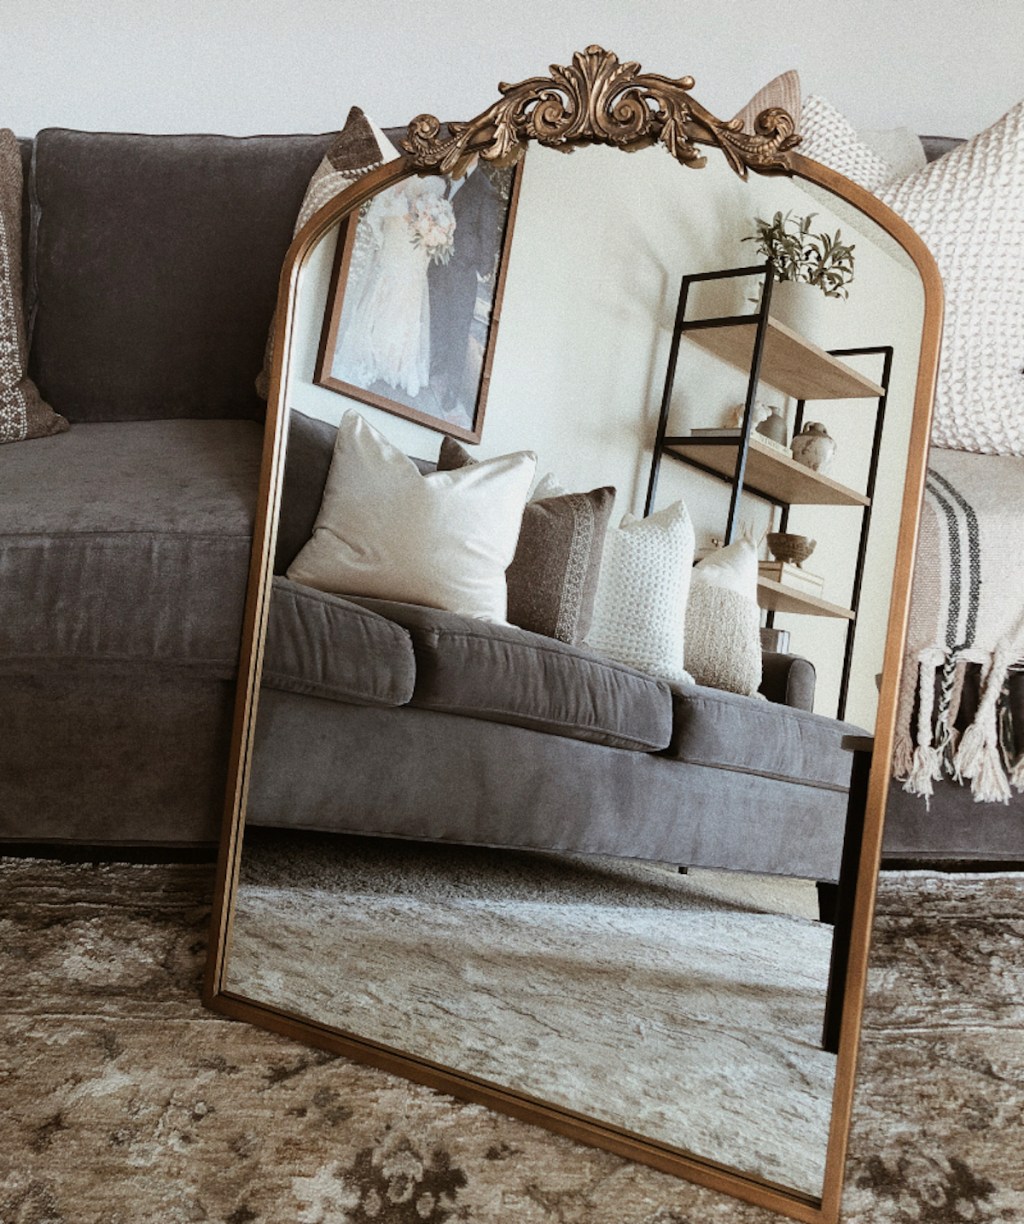 gold mirror on rug leaning on gray couch 